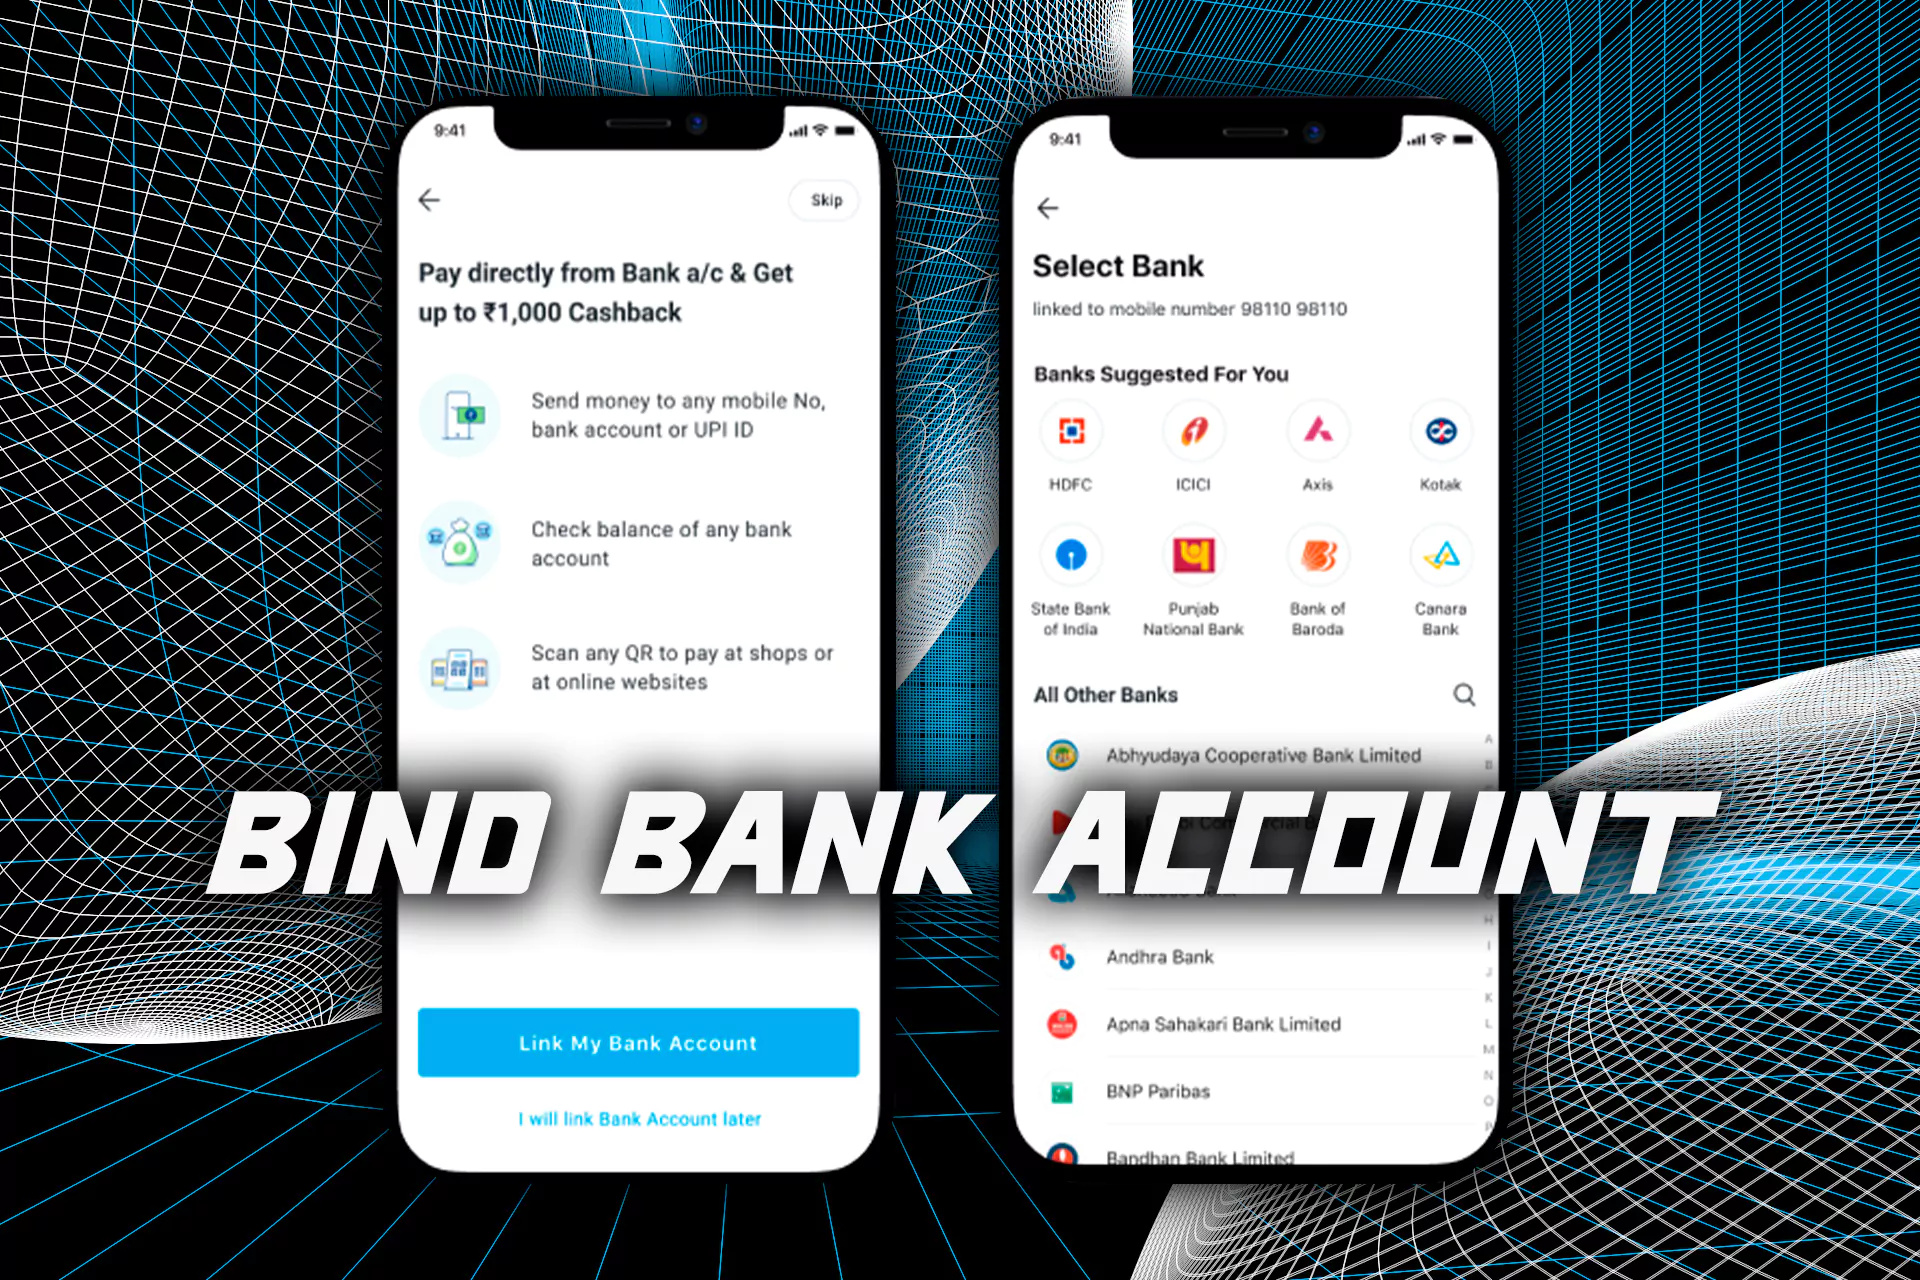 Link your account to the existed bank account.